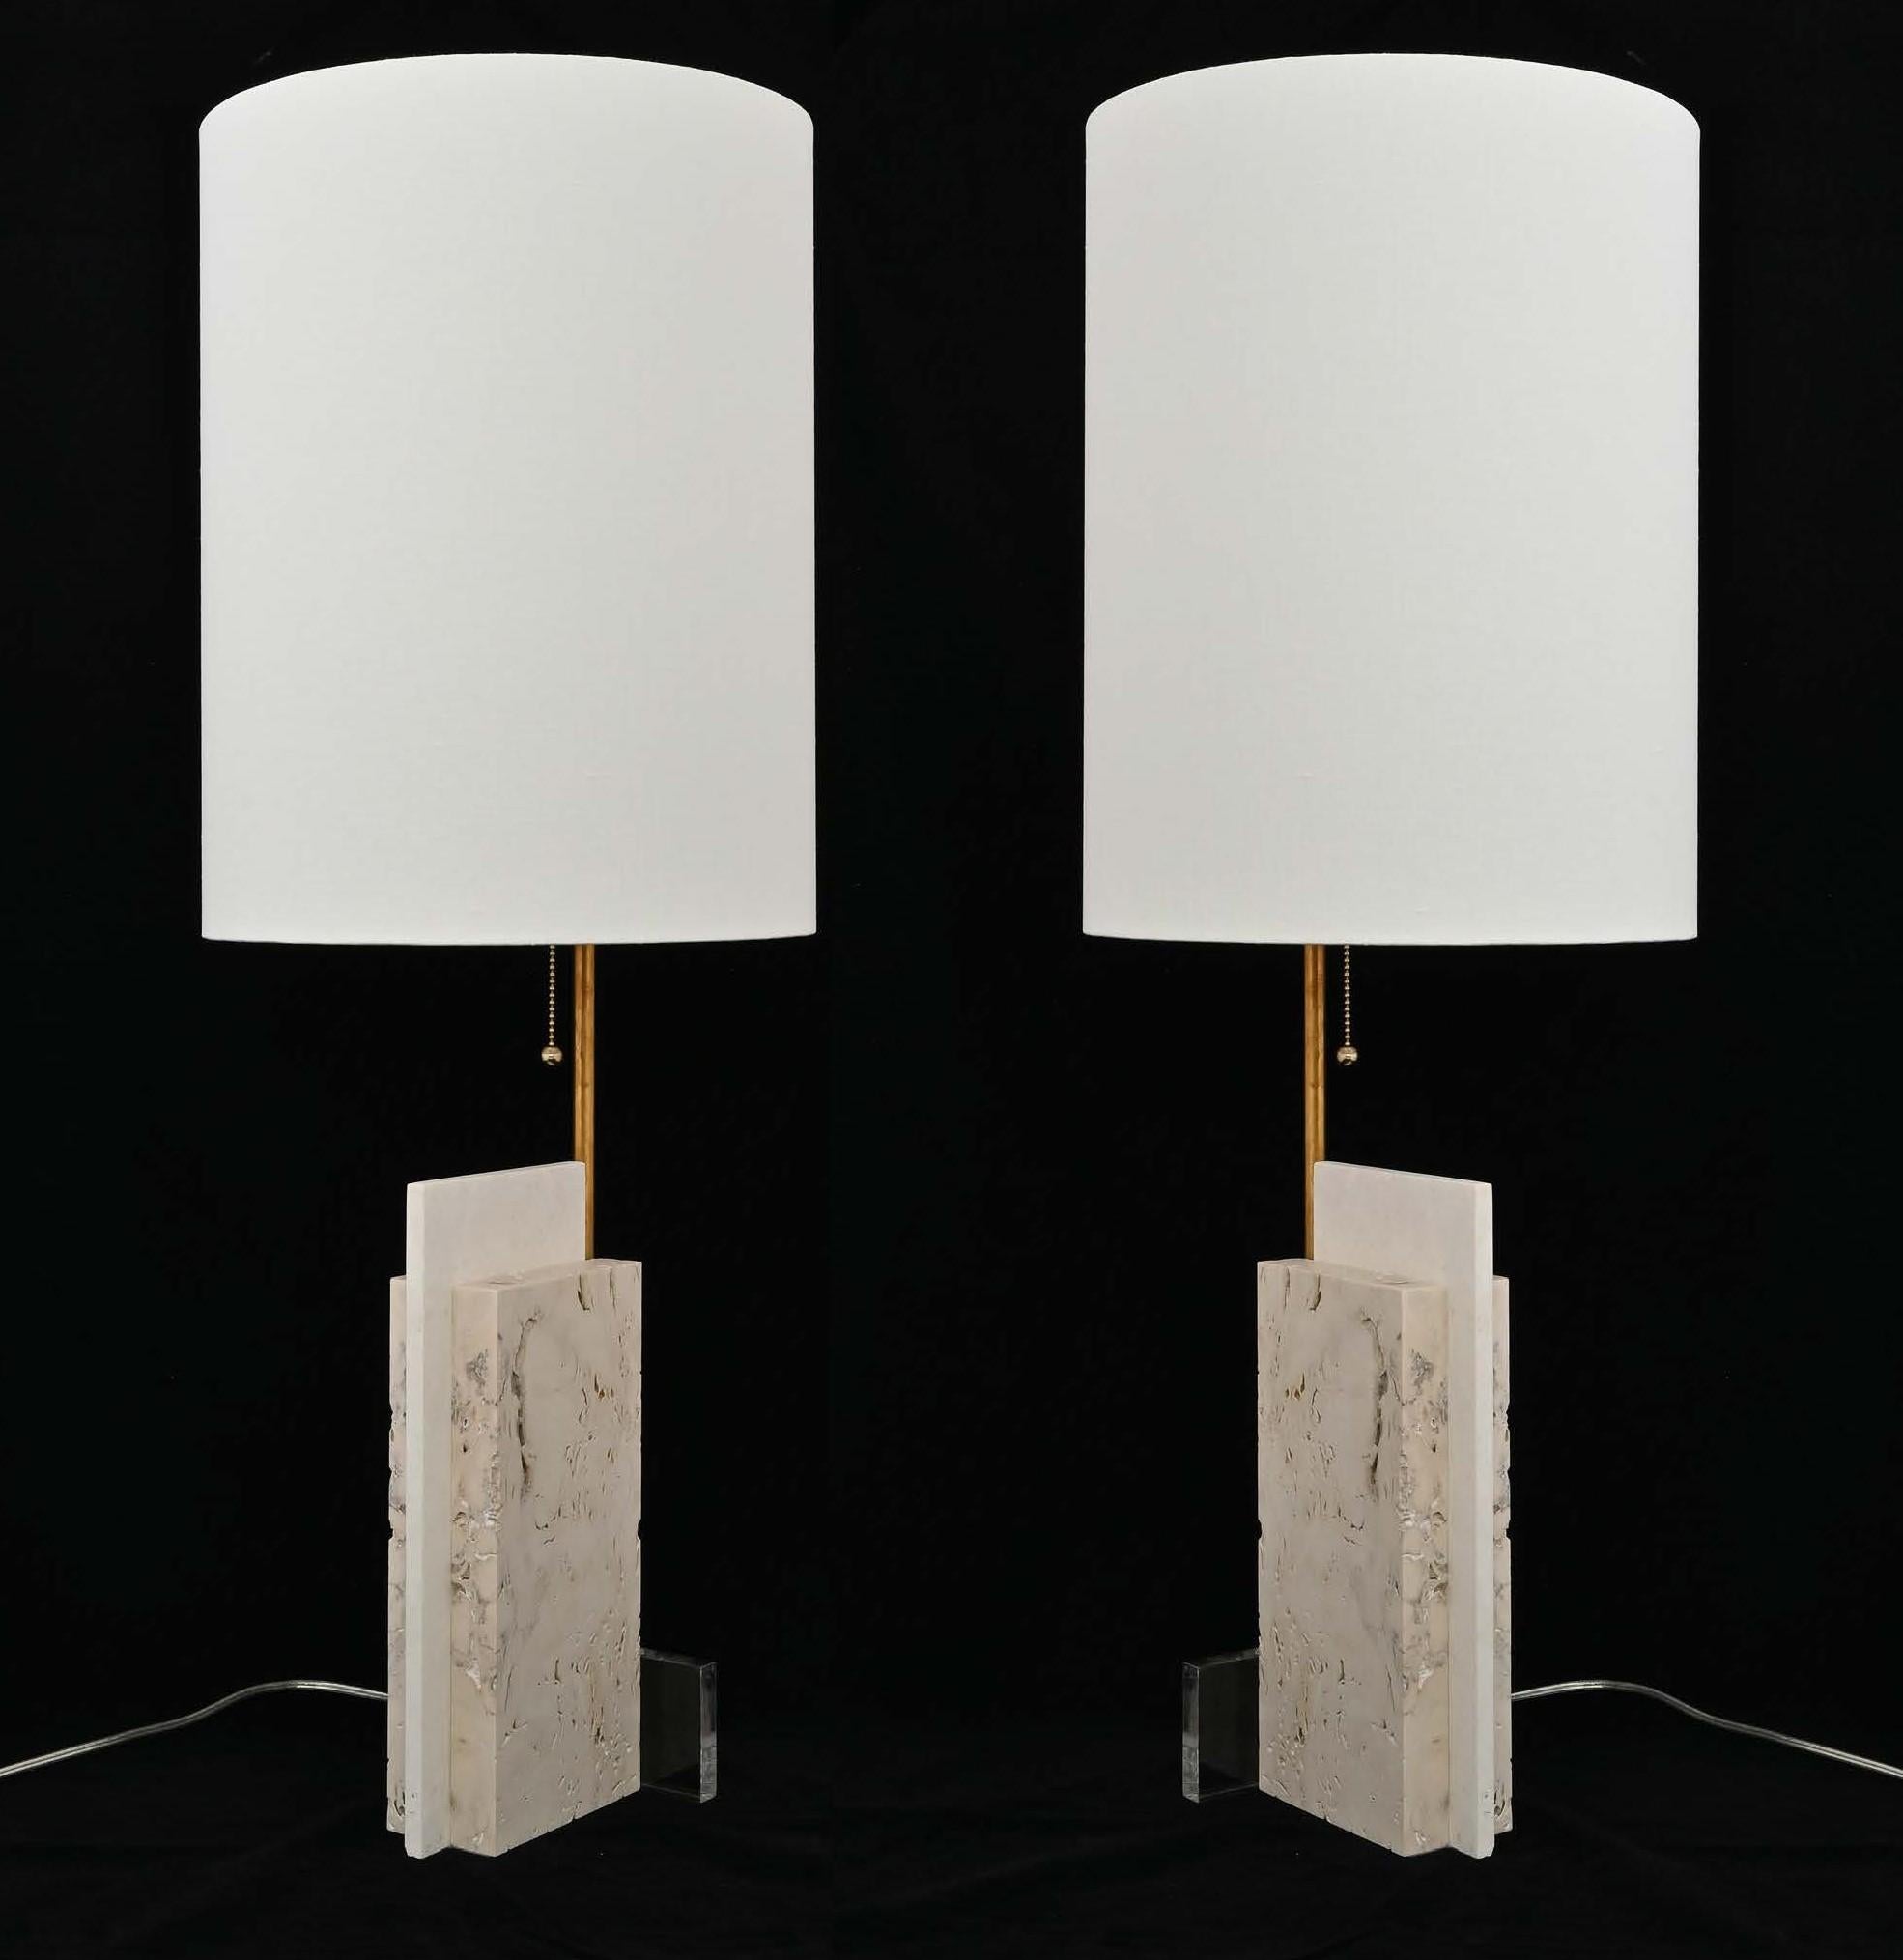 Elegant pair of modern craftsman table lamps in travertine and acrylic featuring a sober, minimal design focusing on the simplicity and luxury of the materials.

The overall measurement of 36 H x 13 W x 13 D. The shade is 13 W x 17 H. The marble